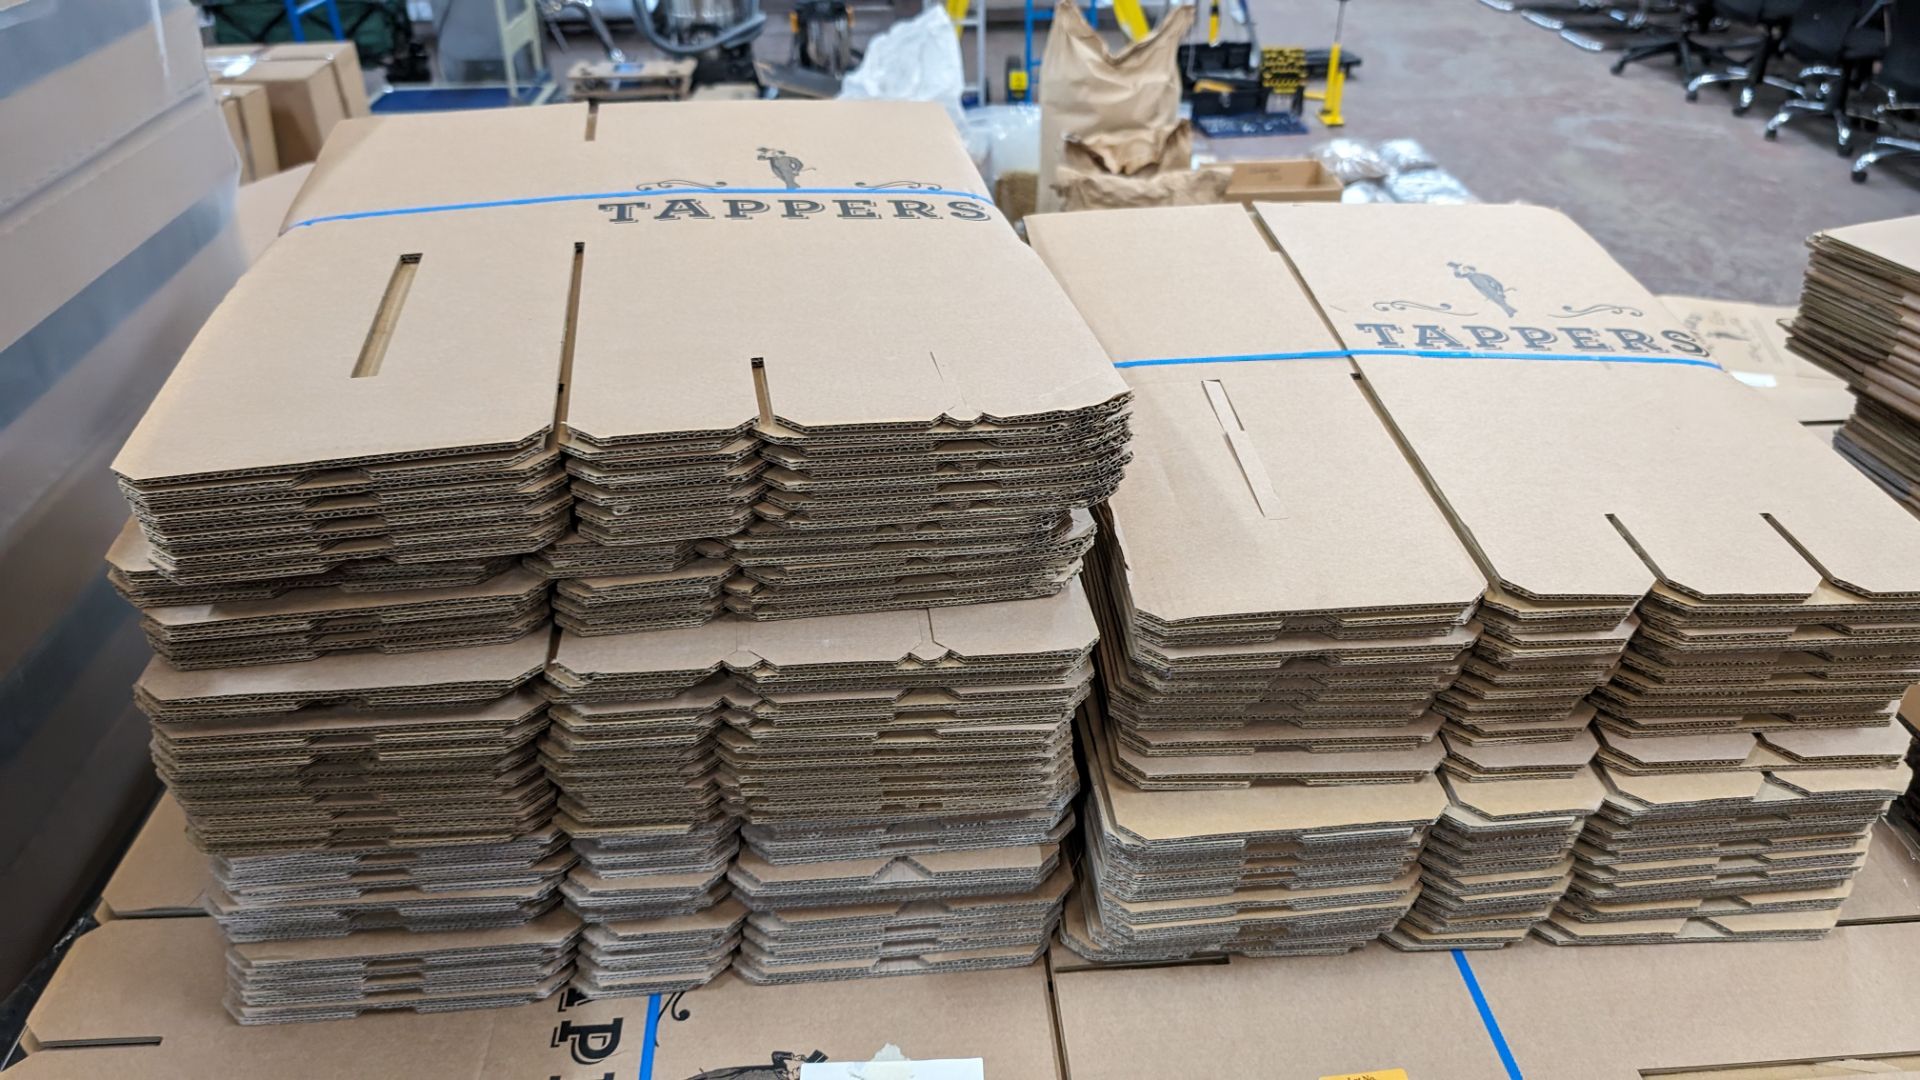 The contents of a pallet of flatpack cardboard boxes in 4 stacks. Each box when assembled incorpora - Image 7 of 7